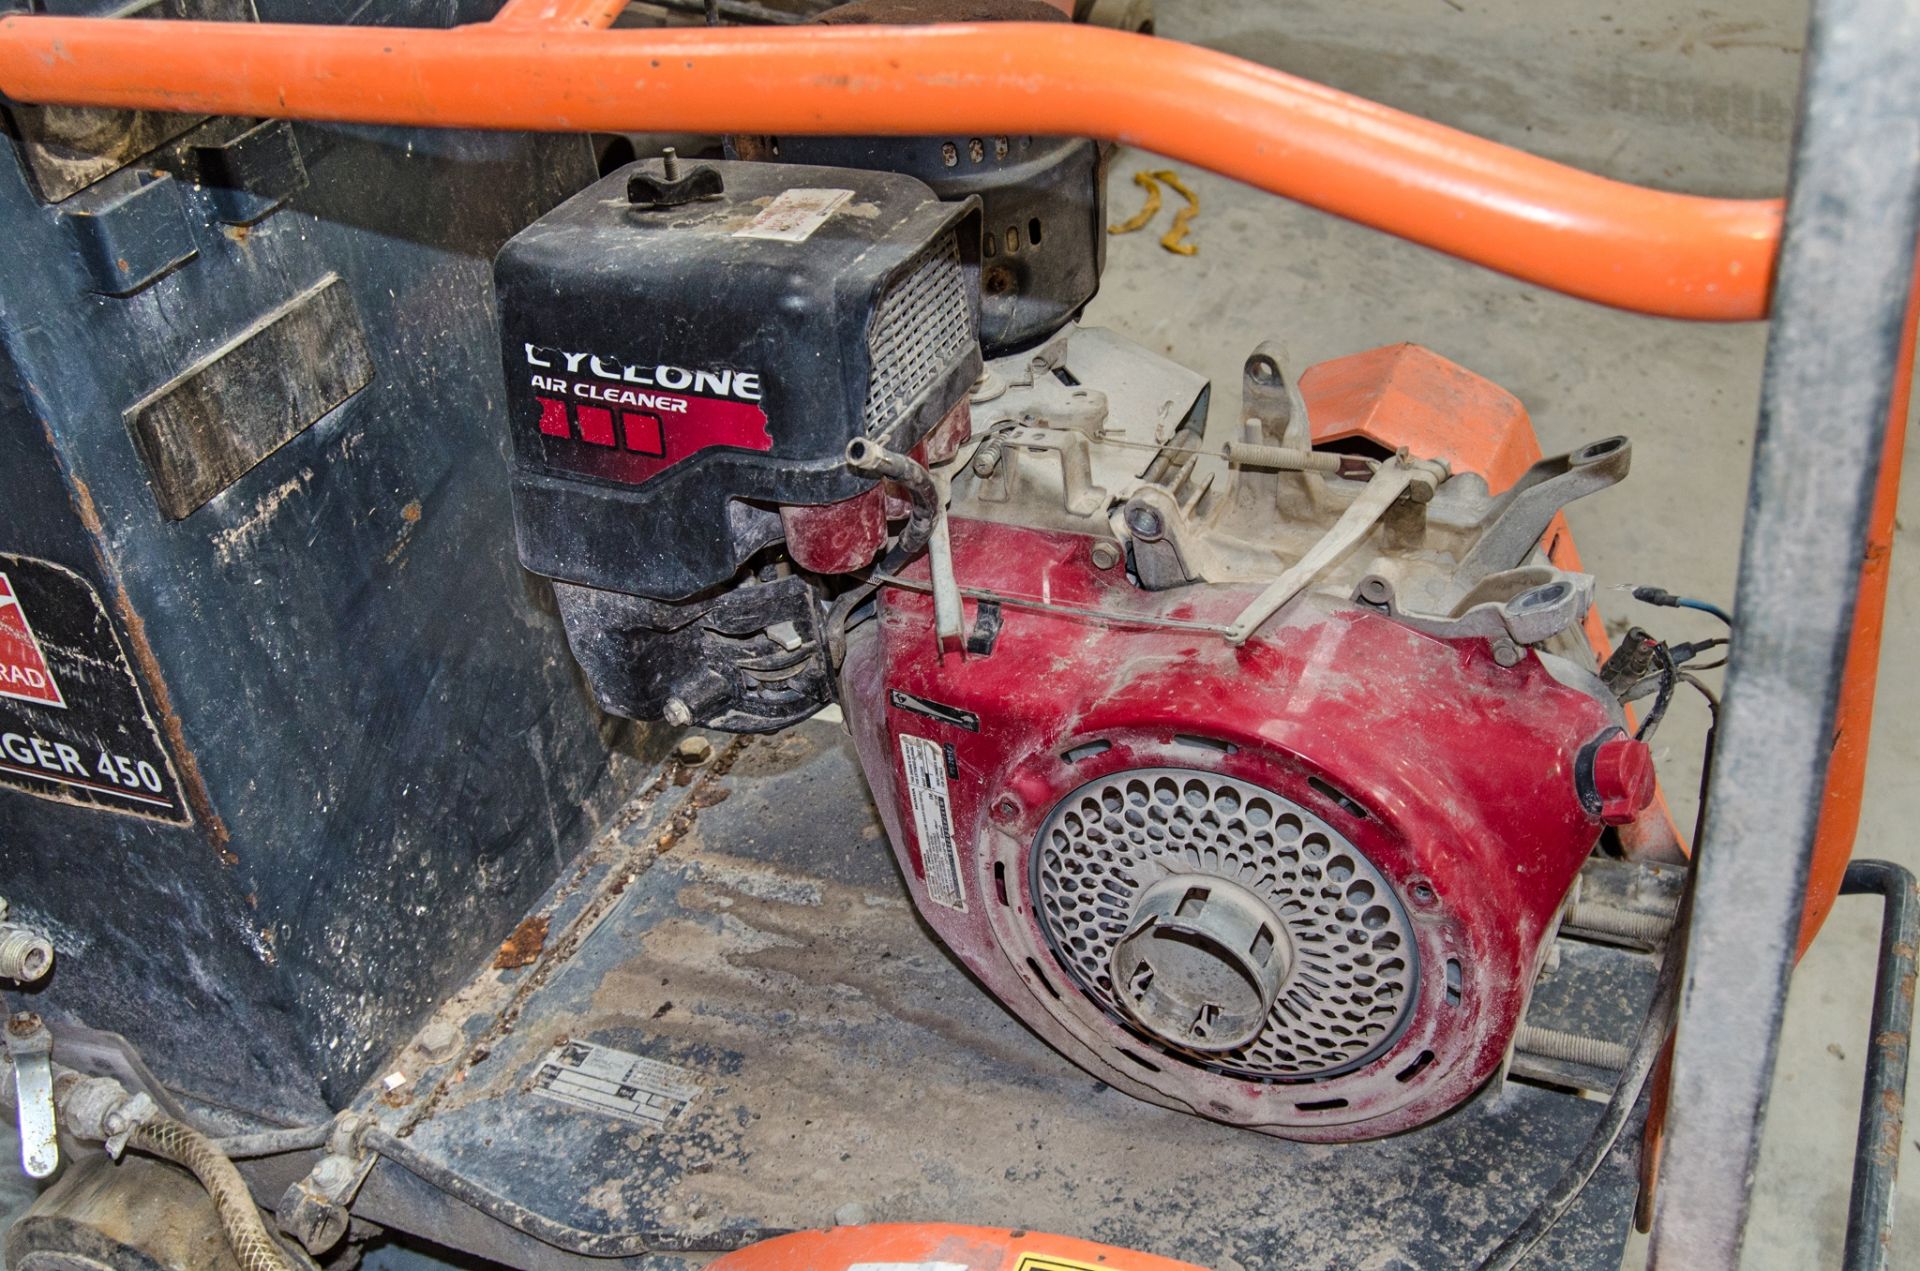 Altrad Ranger 450 petrol driven road saw ** Pull cord assembly and petrol tank missing ** 18065530 - Image 3 of 3